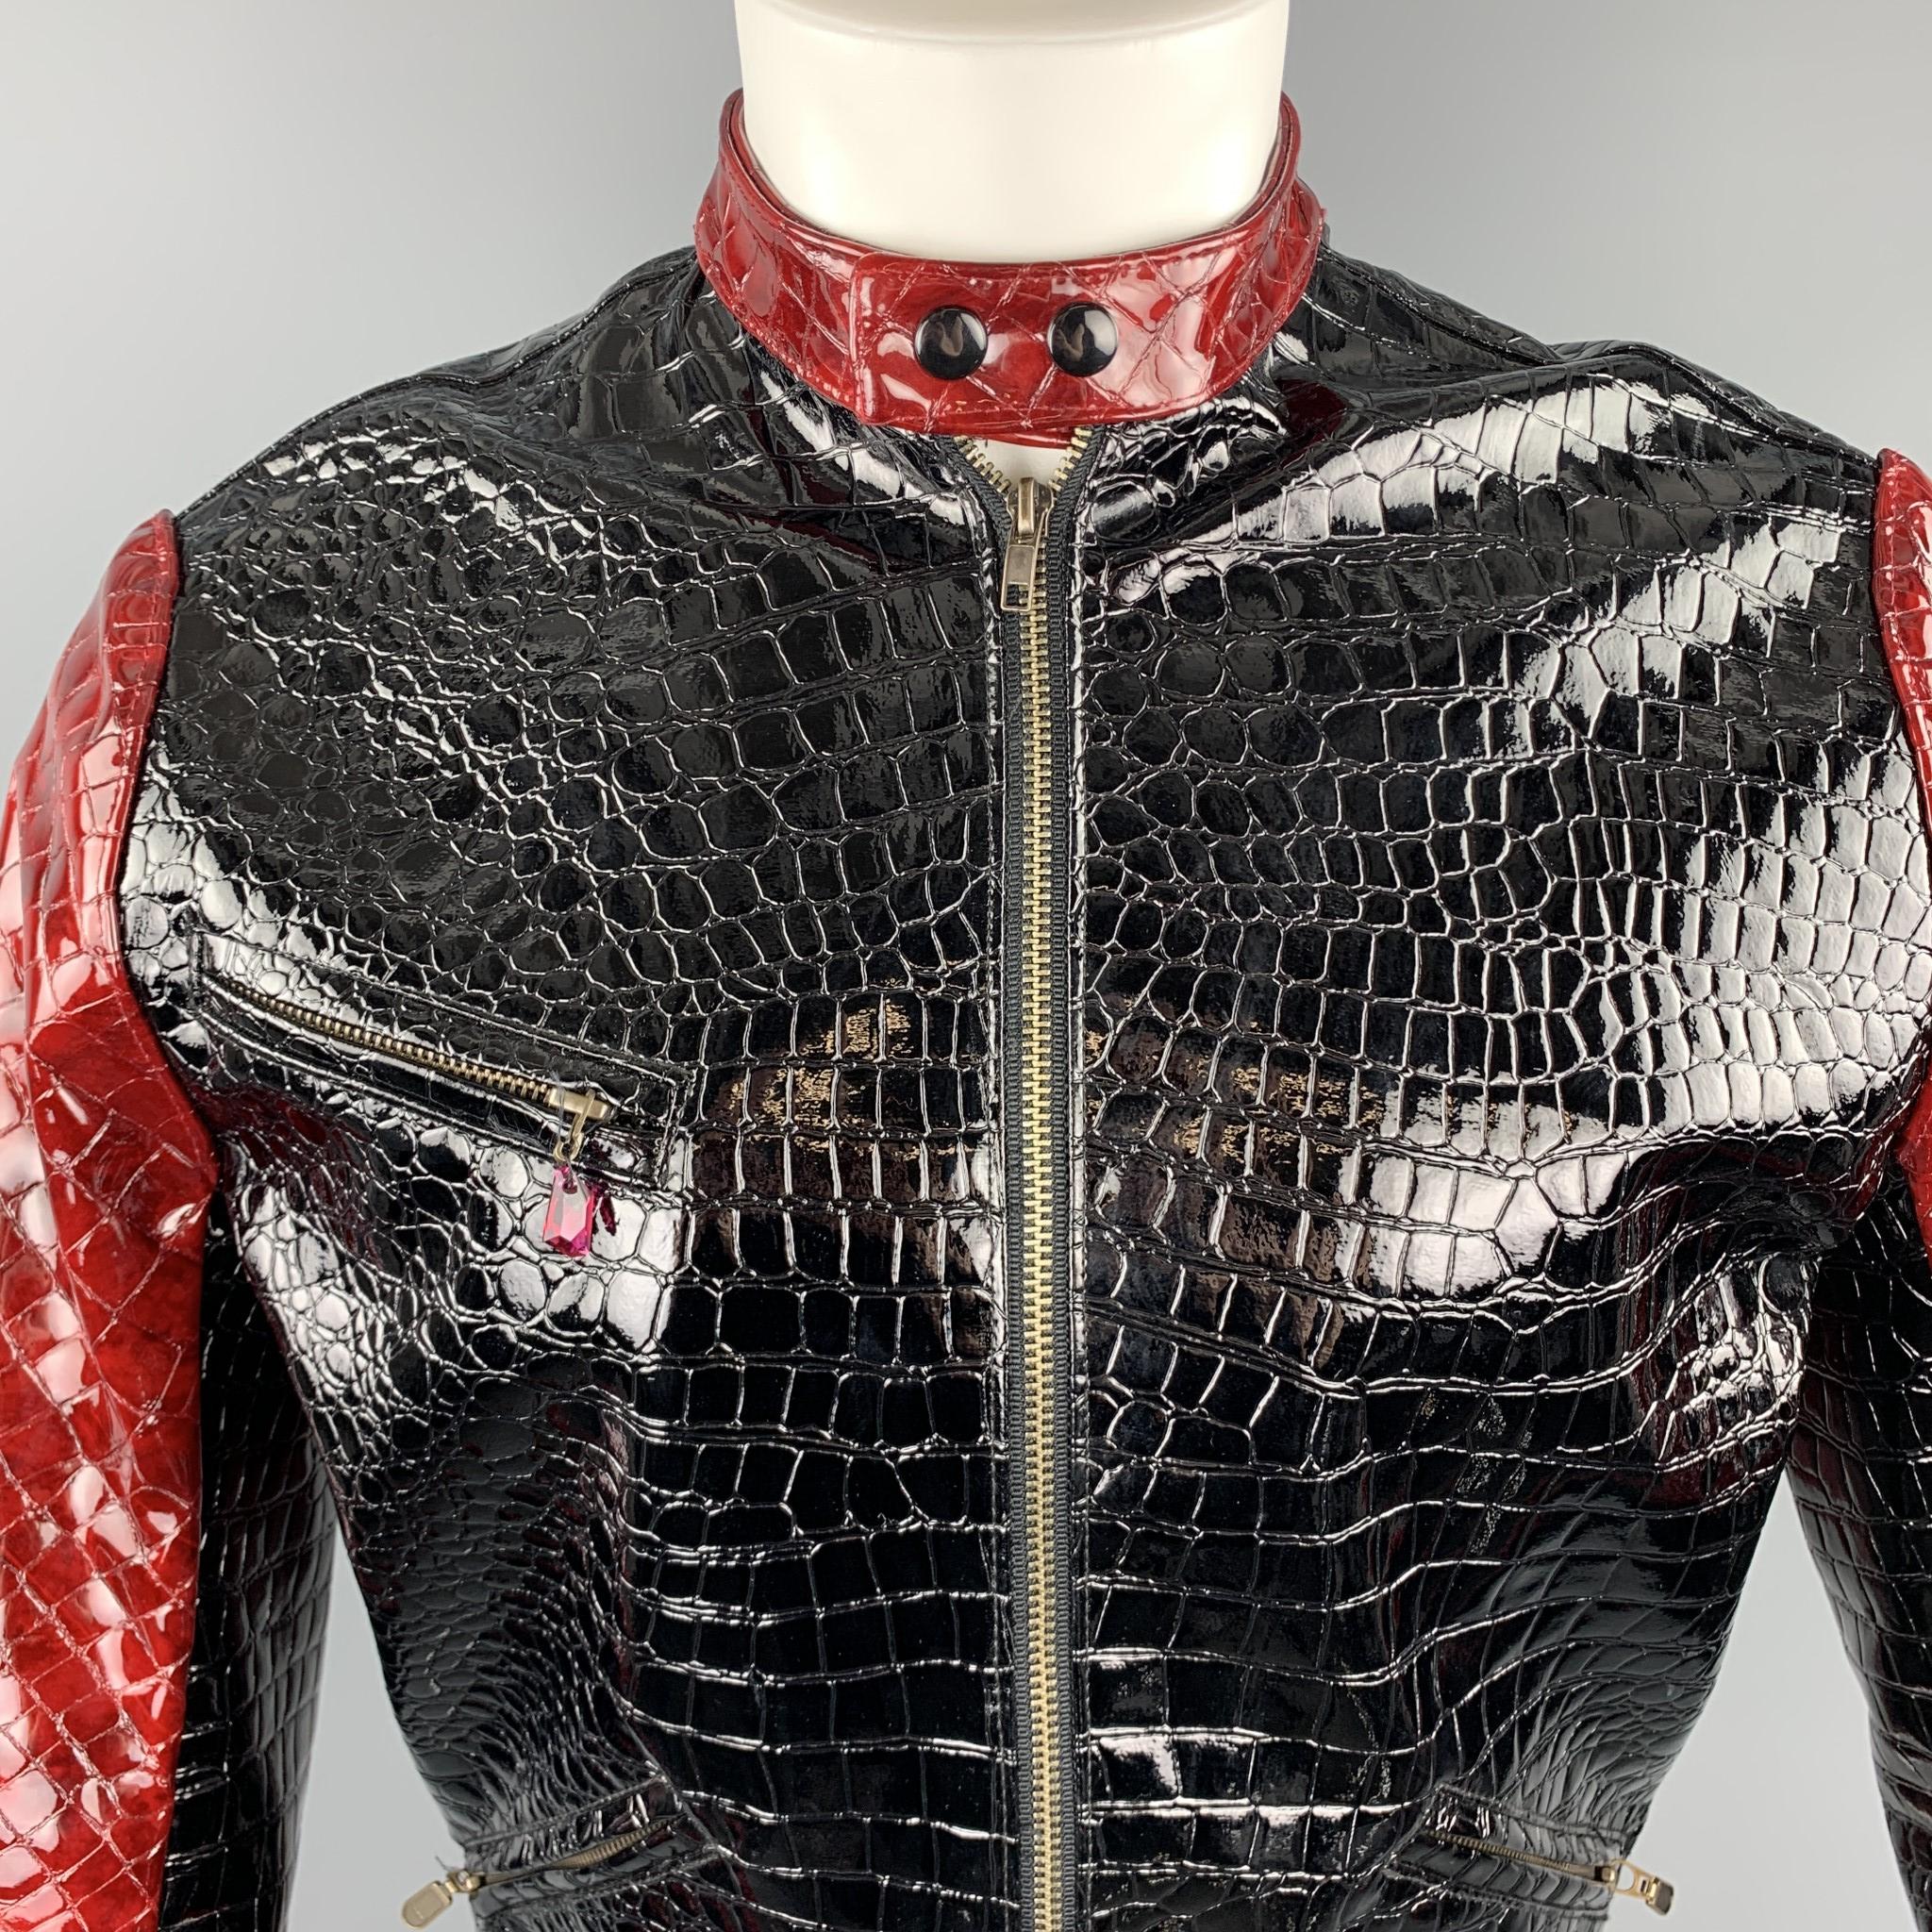 Very Rare TRAVER RAINS of HEATHERETTE biker jacket comes in black alligator textured glossy vinyl with a snap band collar, zip front, zip pockets with jewel charm, and red color block panels. Snap on collar broken. As-is. Made in Los Angeles. 

Very